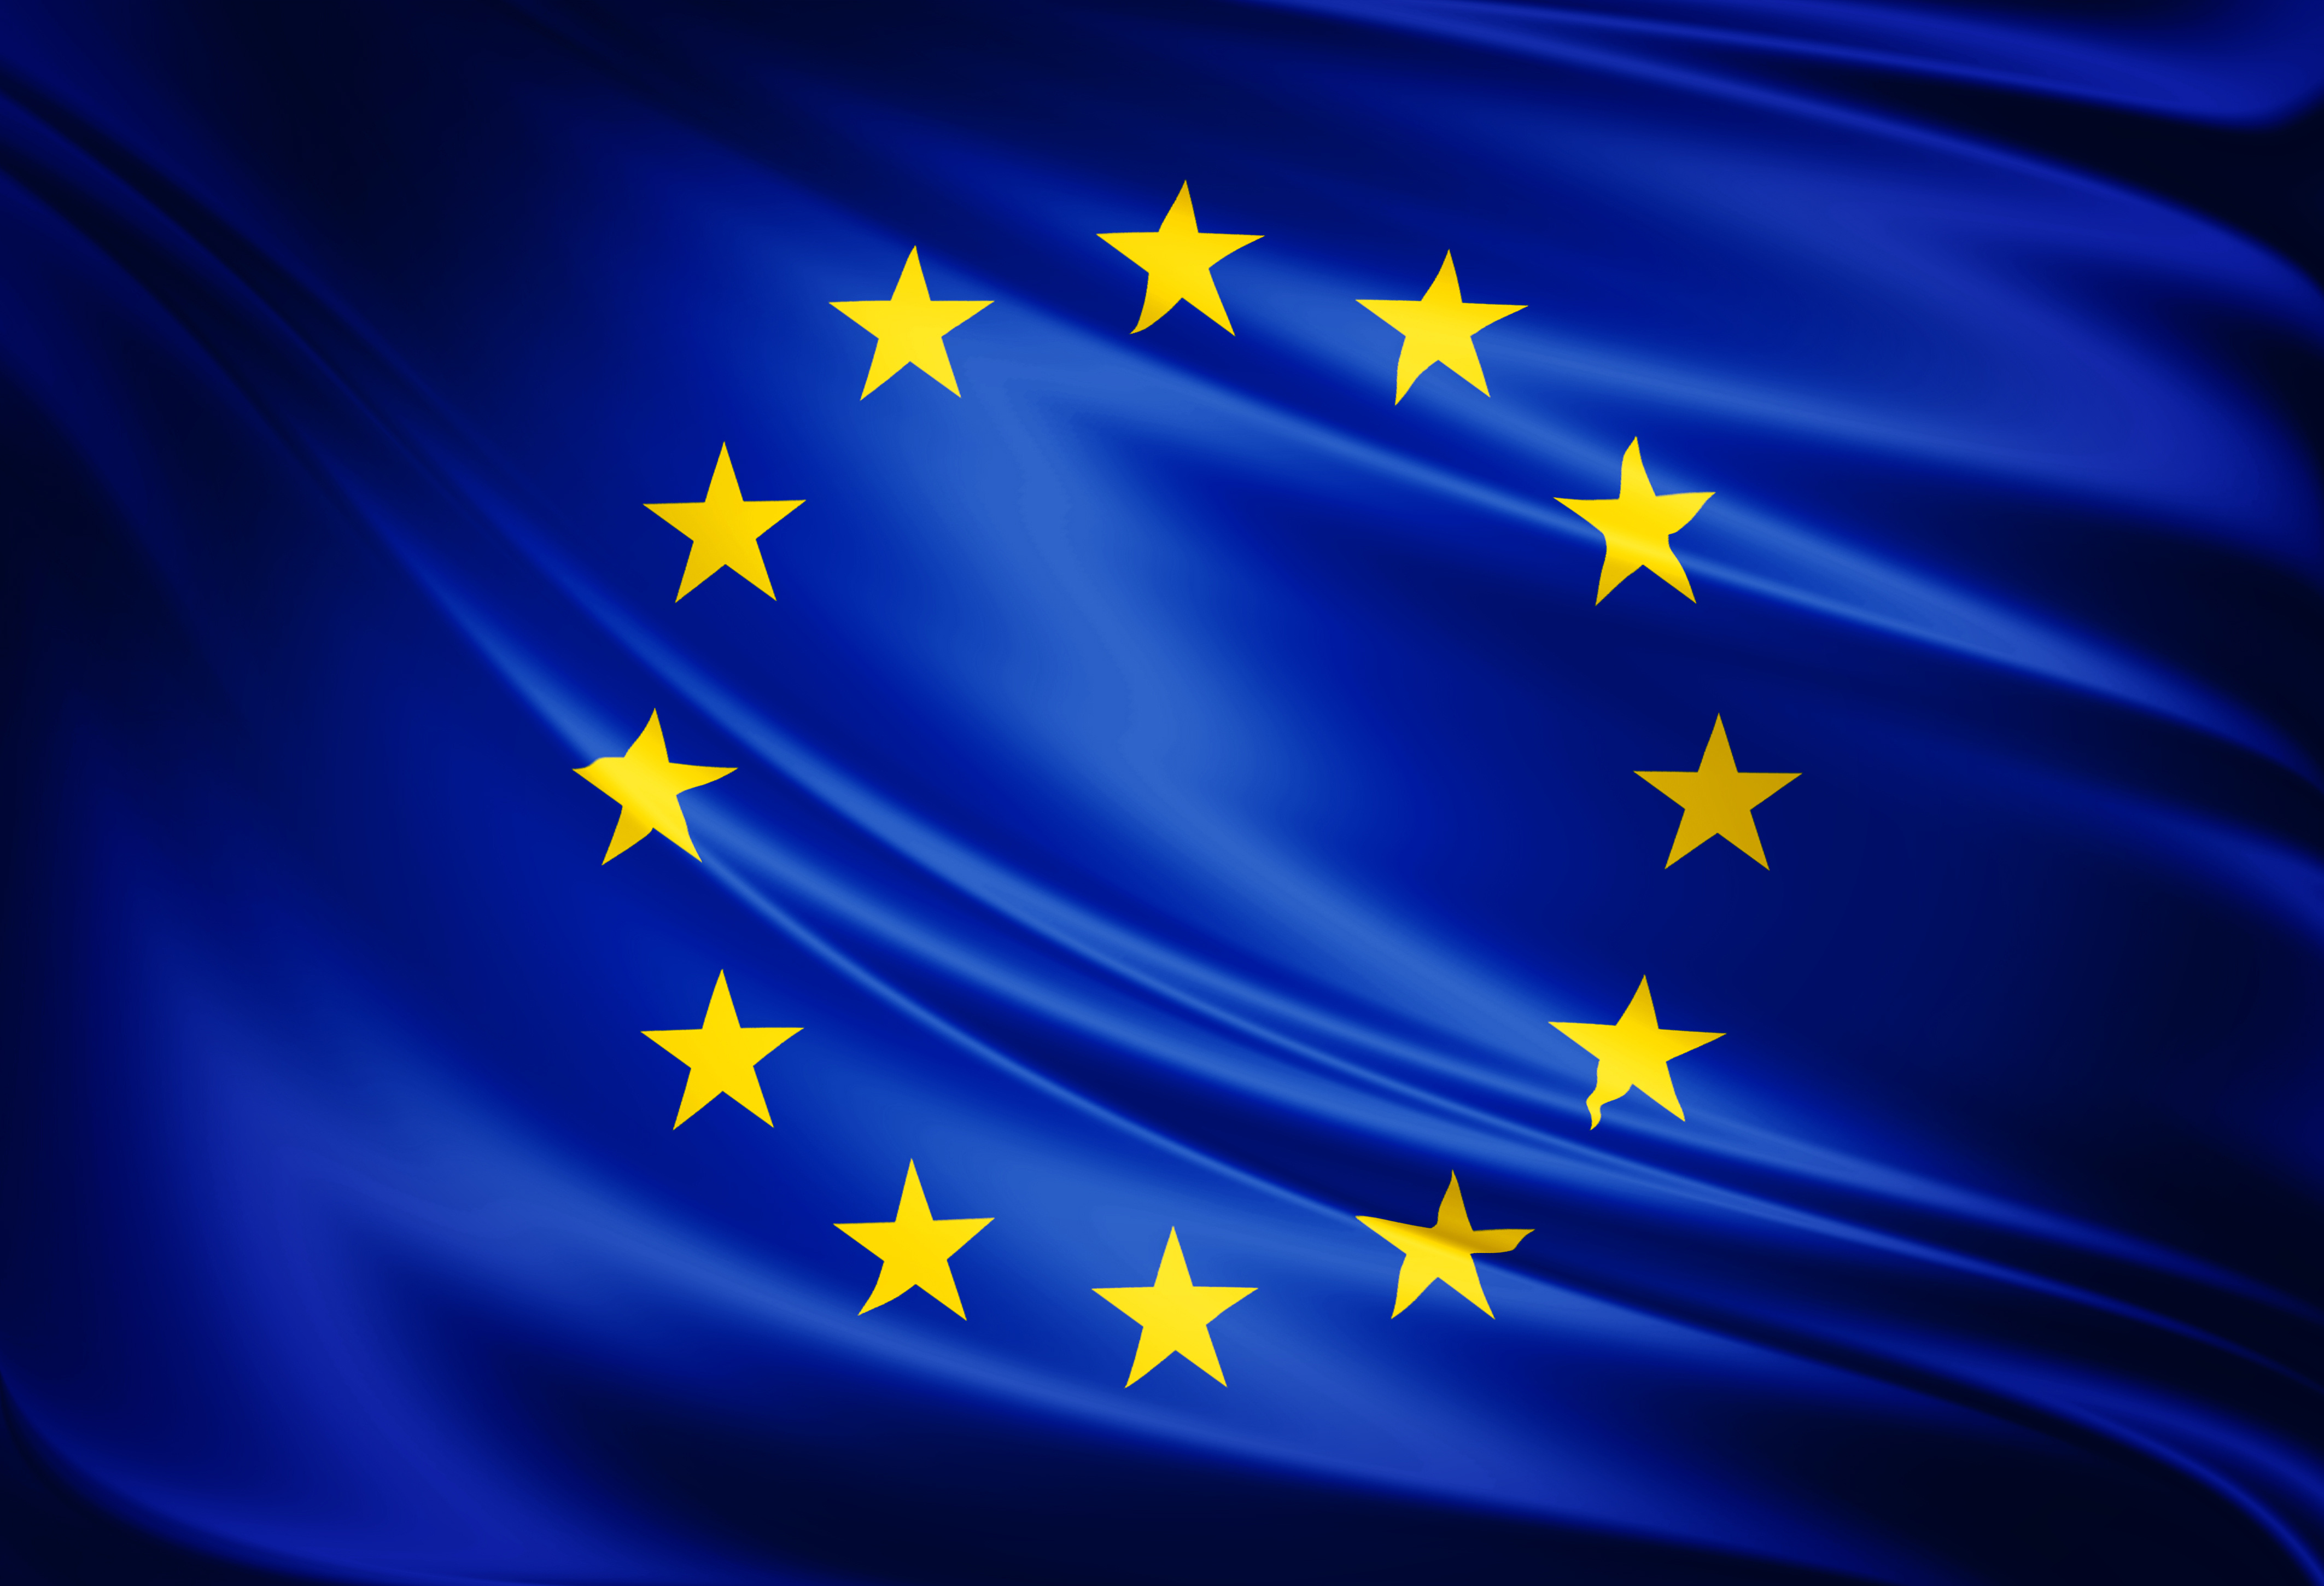 Conditional Support from the European Union to the Vaccine